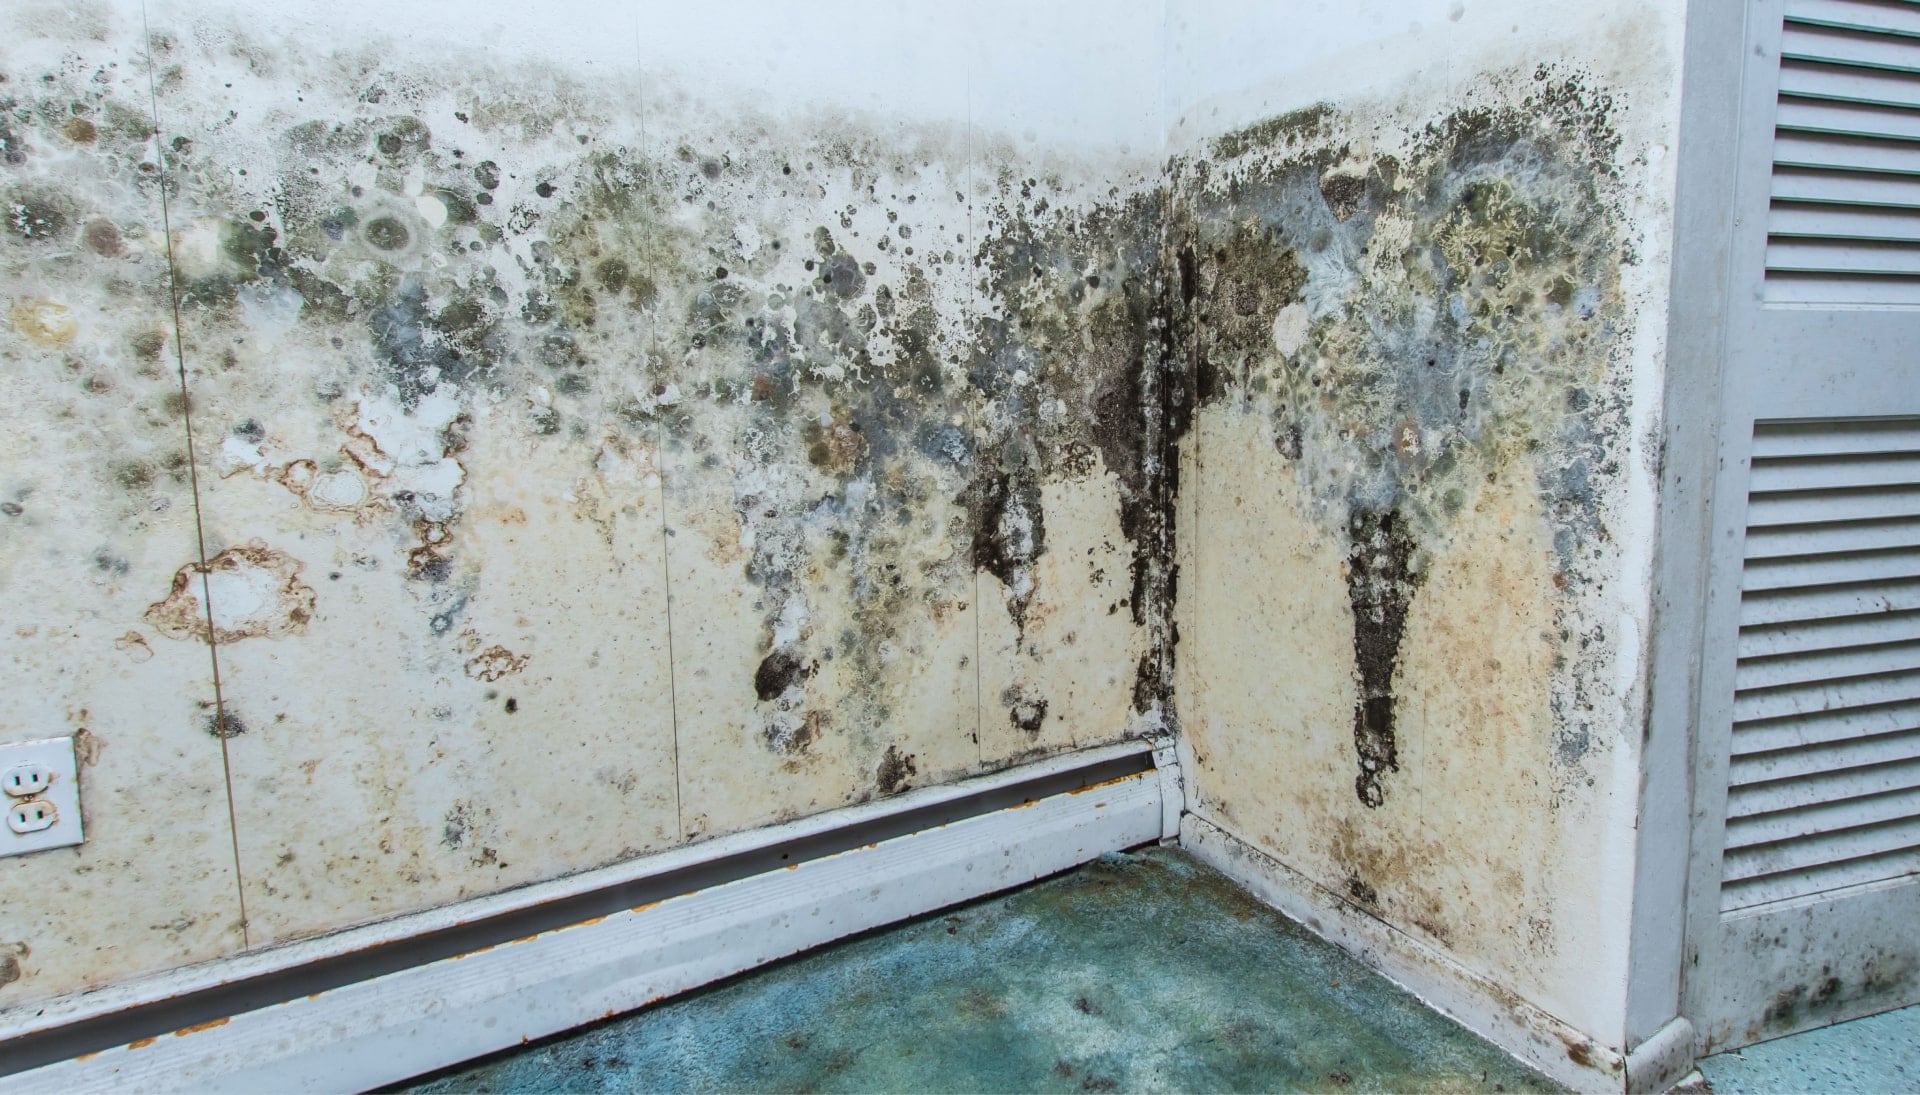 Professional mold removal, odor control, and water damage restoration service in Peoria, Arizona.